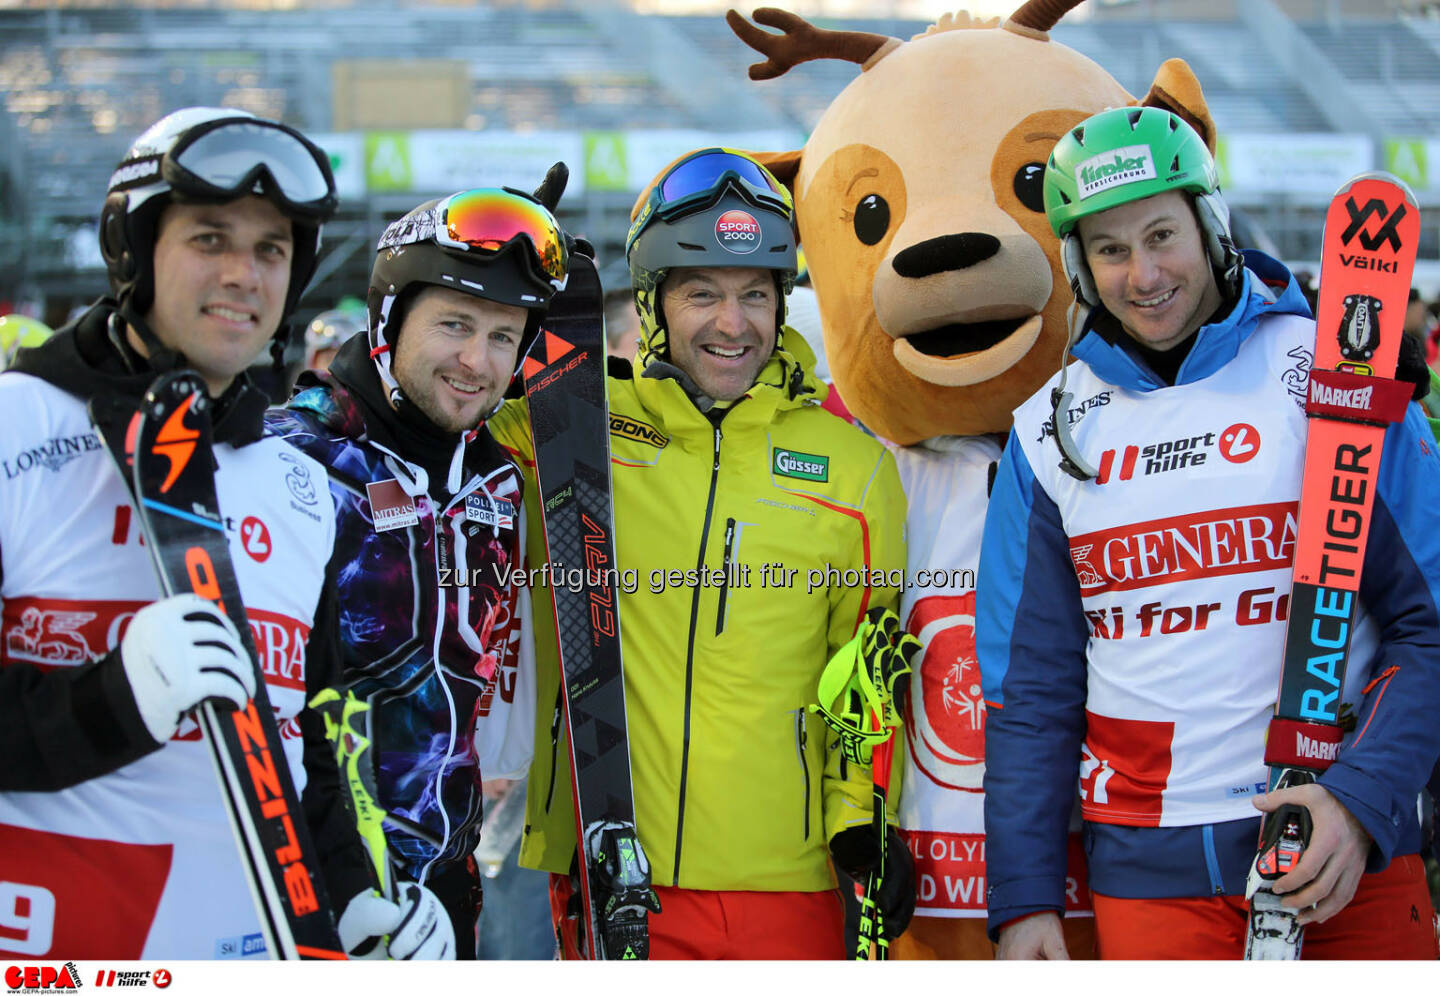 Ski for Gold Charity Race. Image shows Mario Matt, Reinfried Herbst, Hans Knauss, maskot Luis and Manfred Pranger. Keywords: Special Olympics World Winter Games, SOWWG Austria 2017 preview. Photo: GEPA pictures/ Daniel Goetzhaber